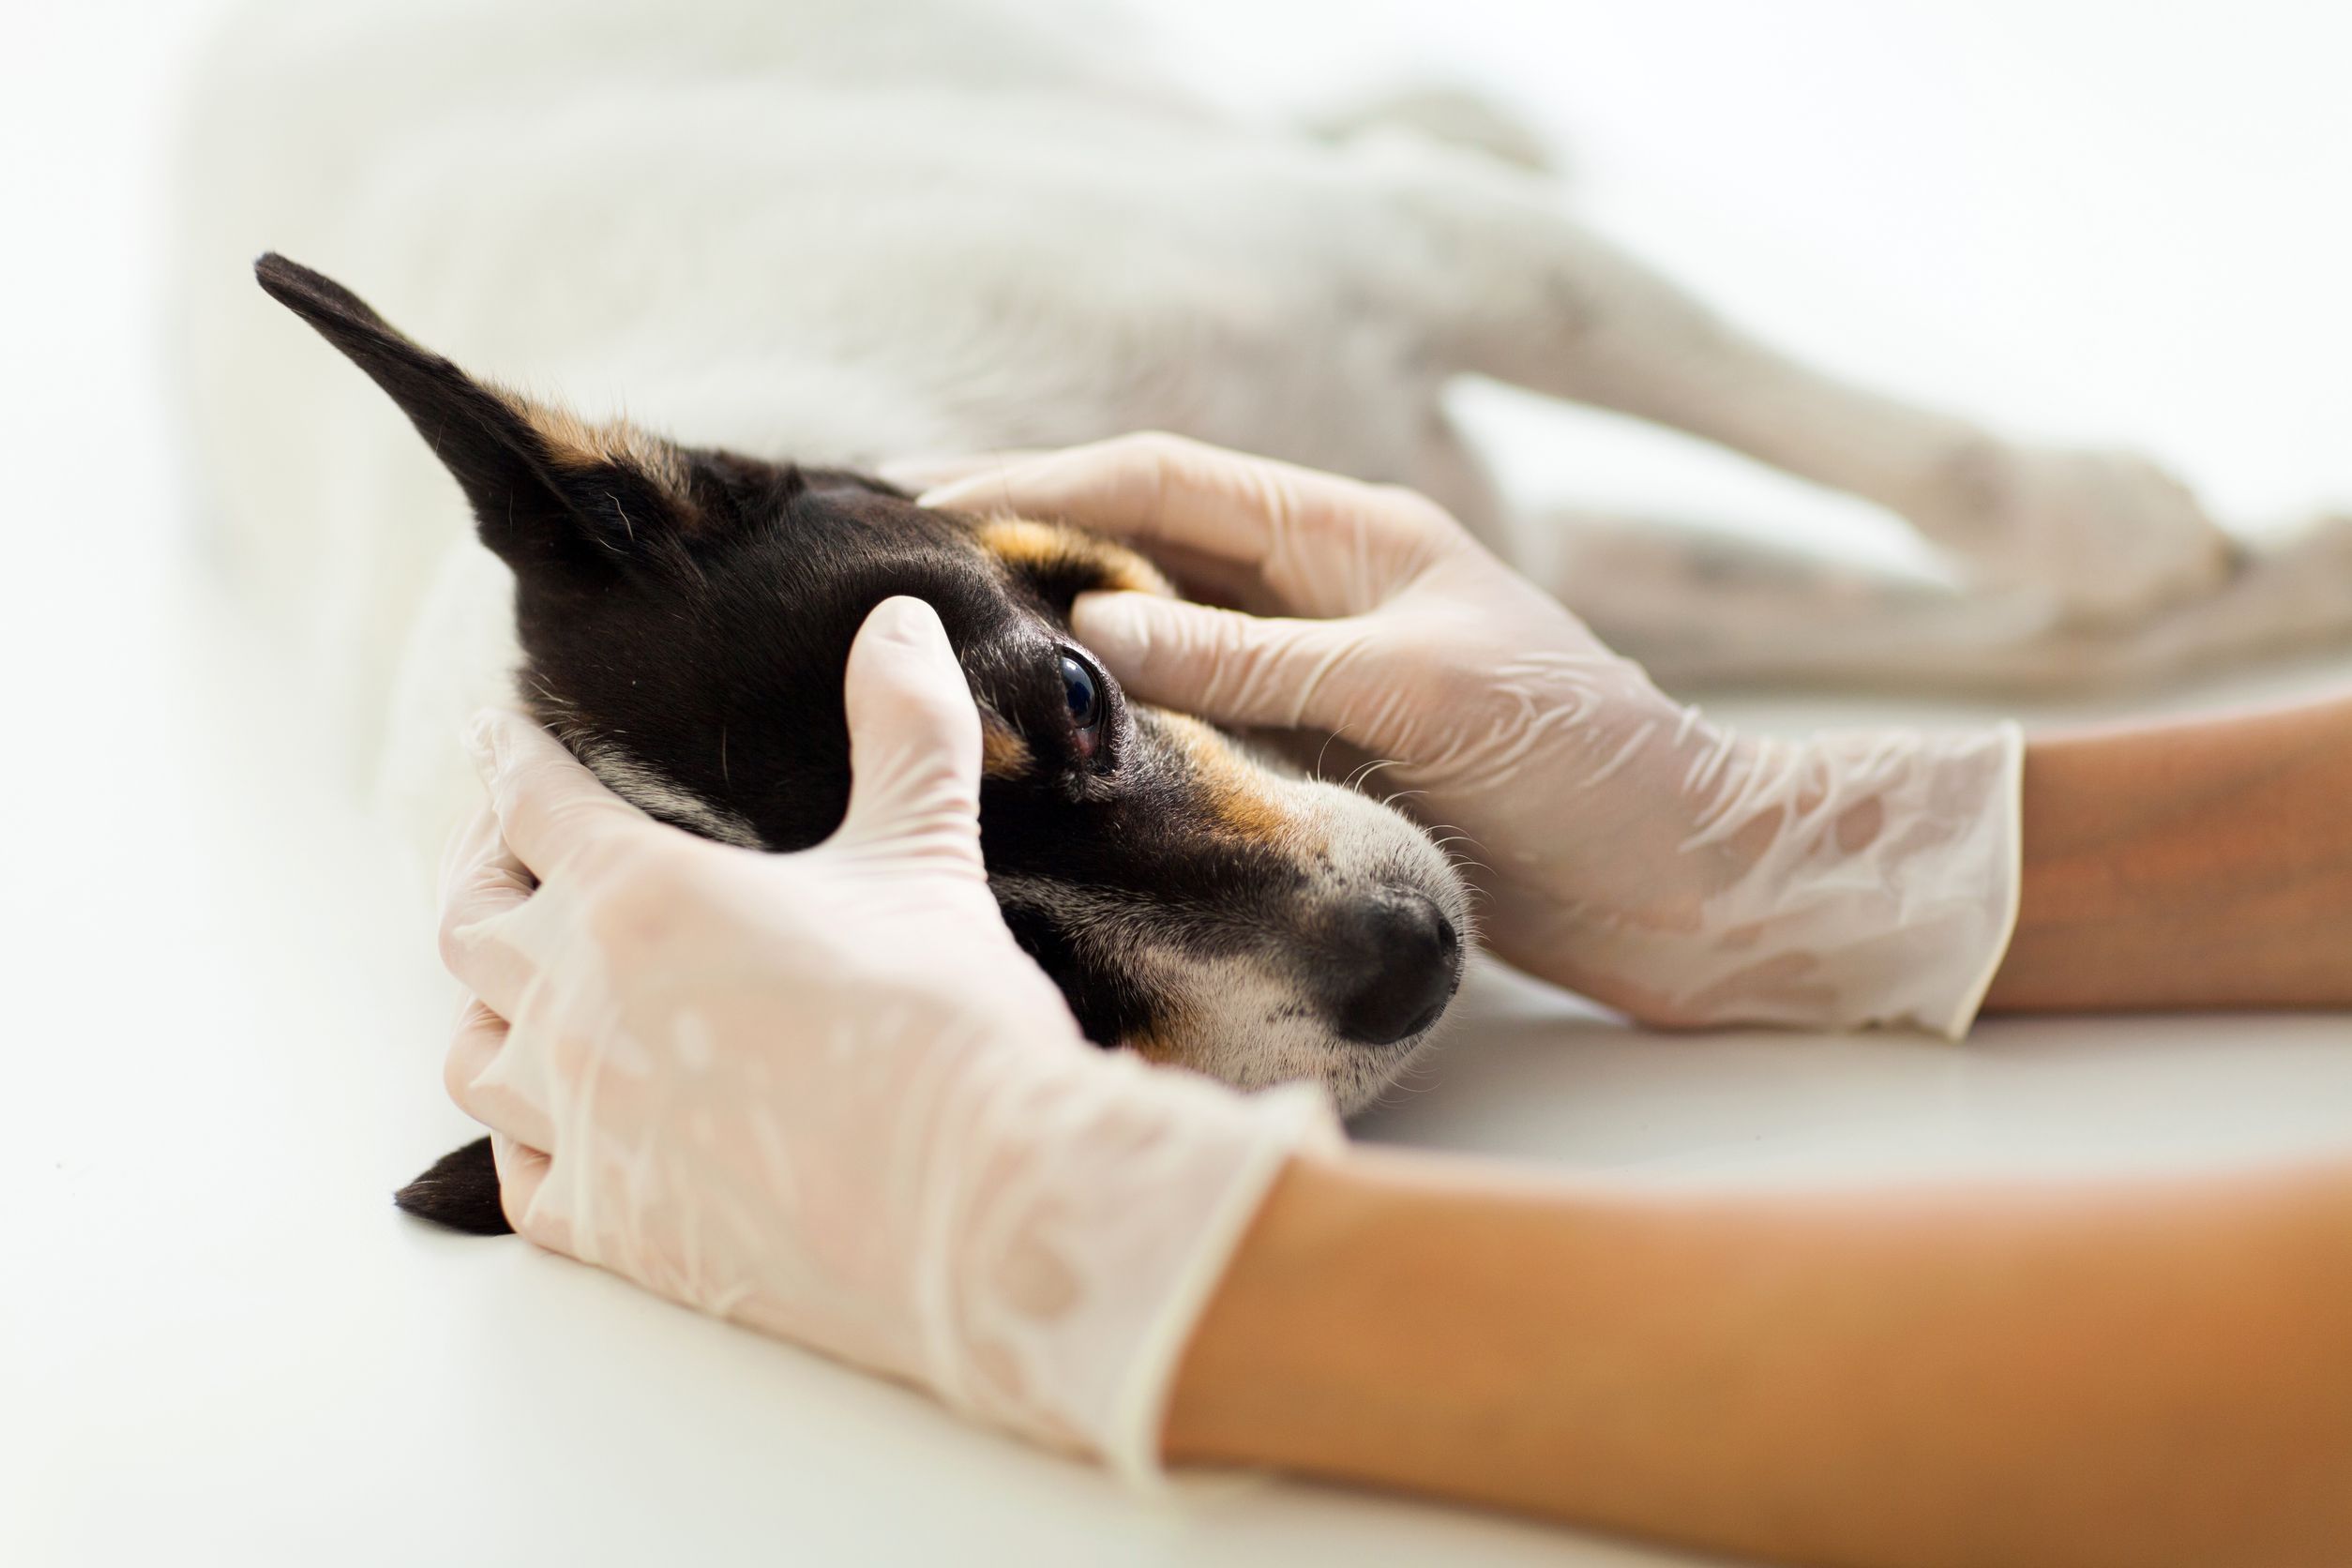 veterinary assistant checking pet dog eye on table